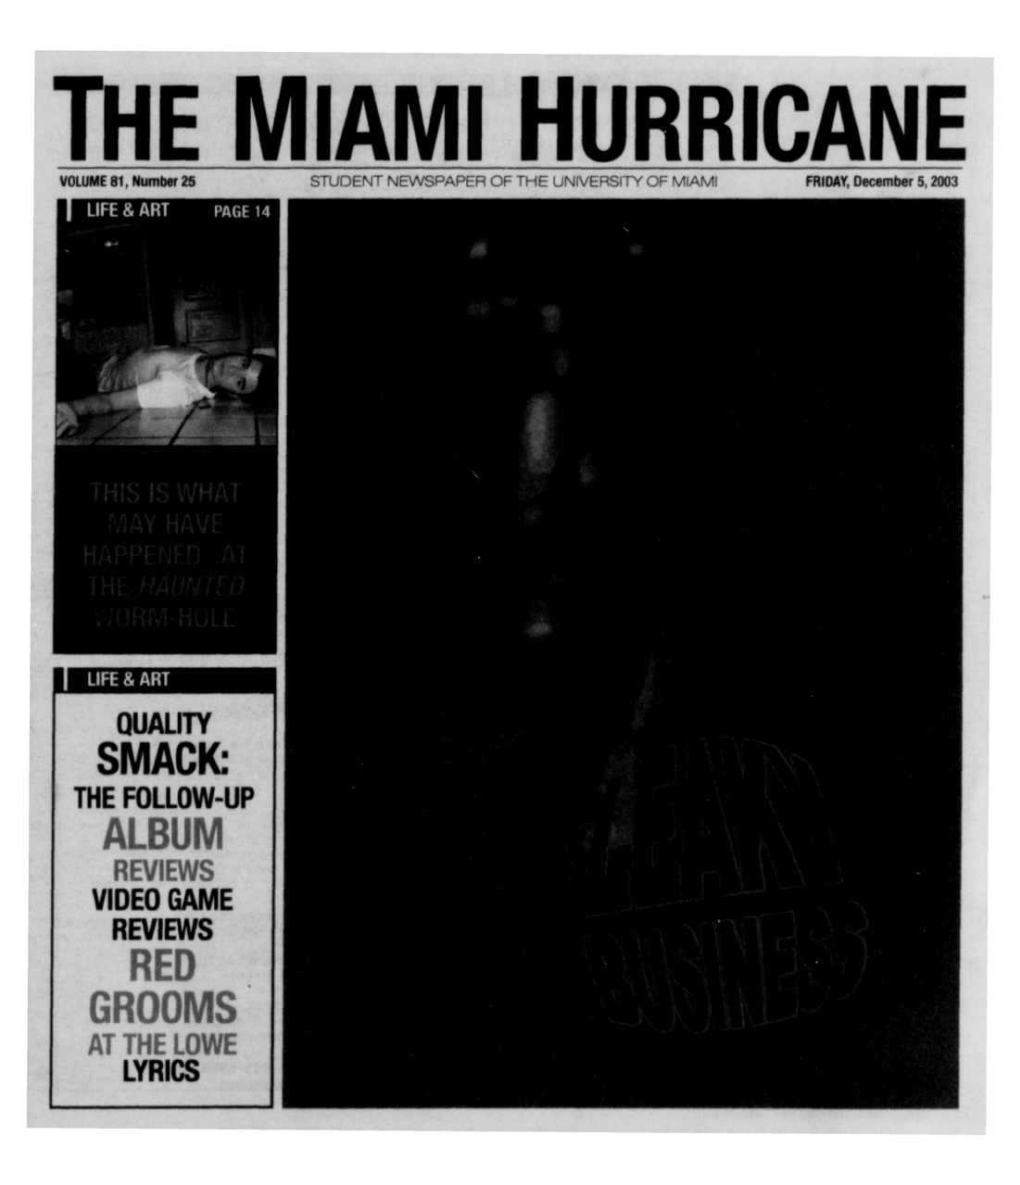 THE MIAMI HURRICANE VOLUME 81, Number 25 STUDENT NEWSPAPER of the UNIVERSITY of MIAMI FRIDAY, December 5, 2003 LIFE & ART PAGE 14